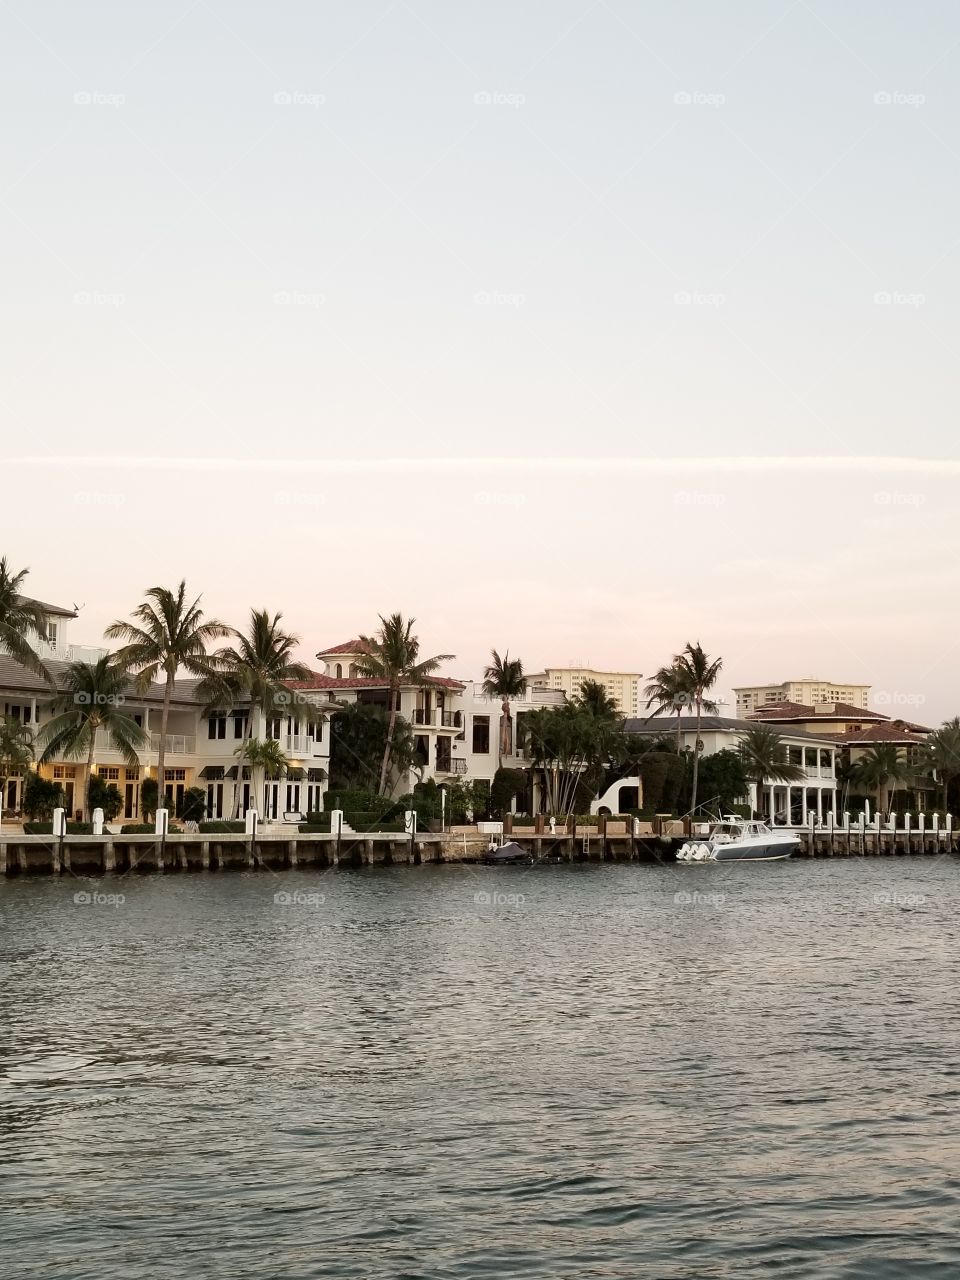 majestic waterfront homes along the intracoastal in Florida